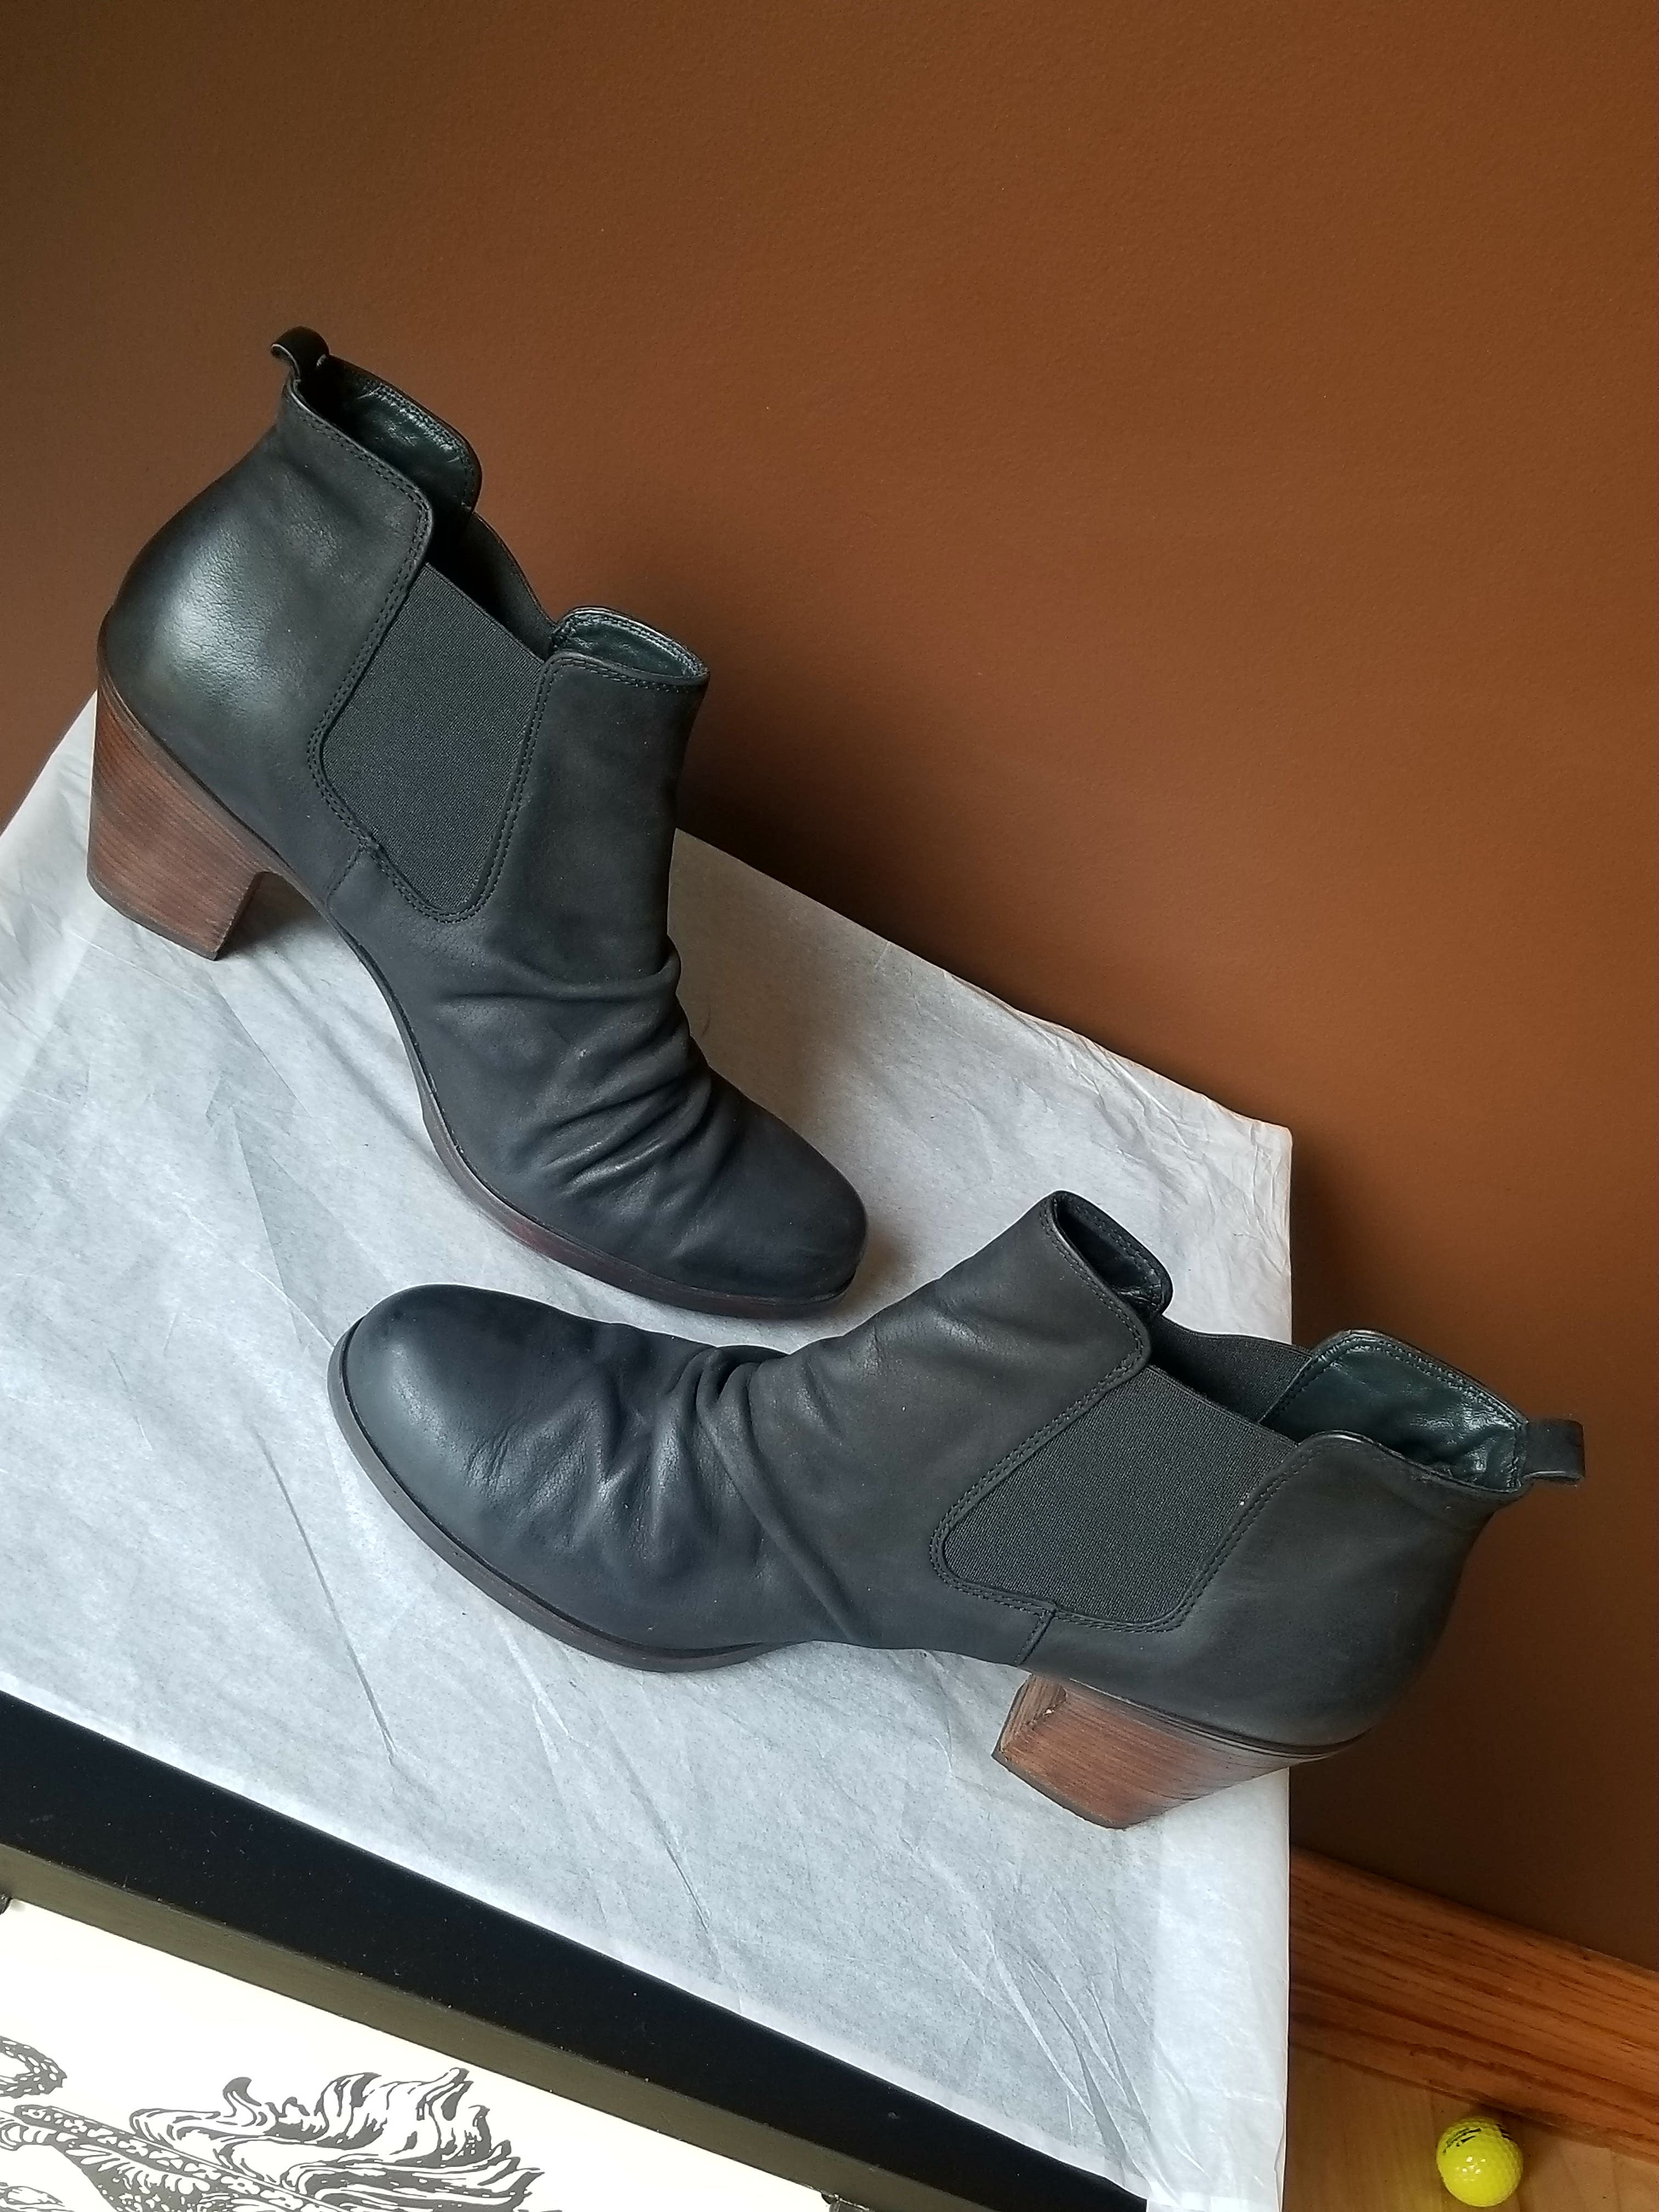 paul green ankle boots uk